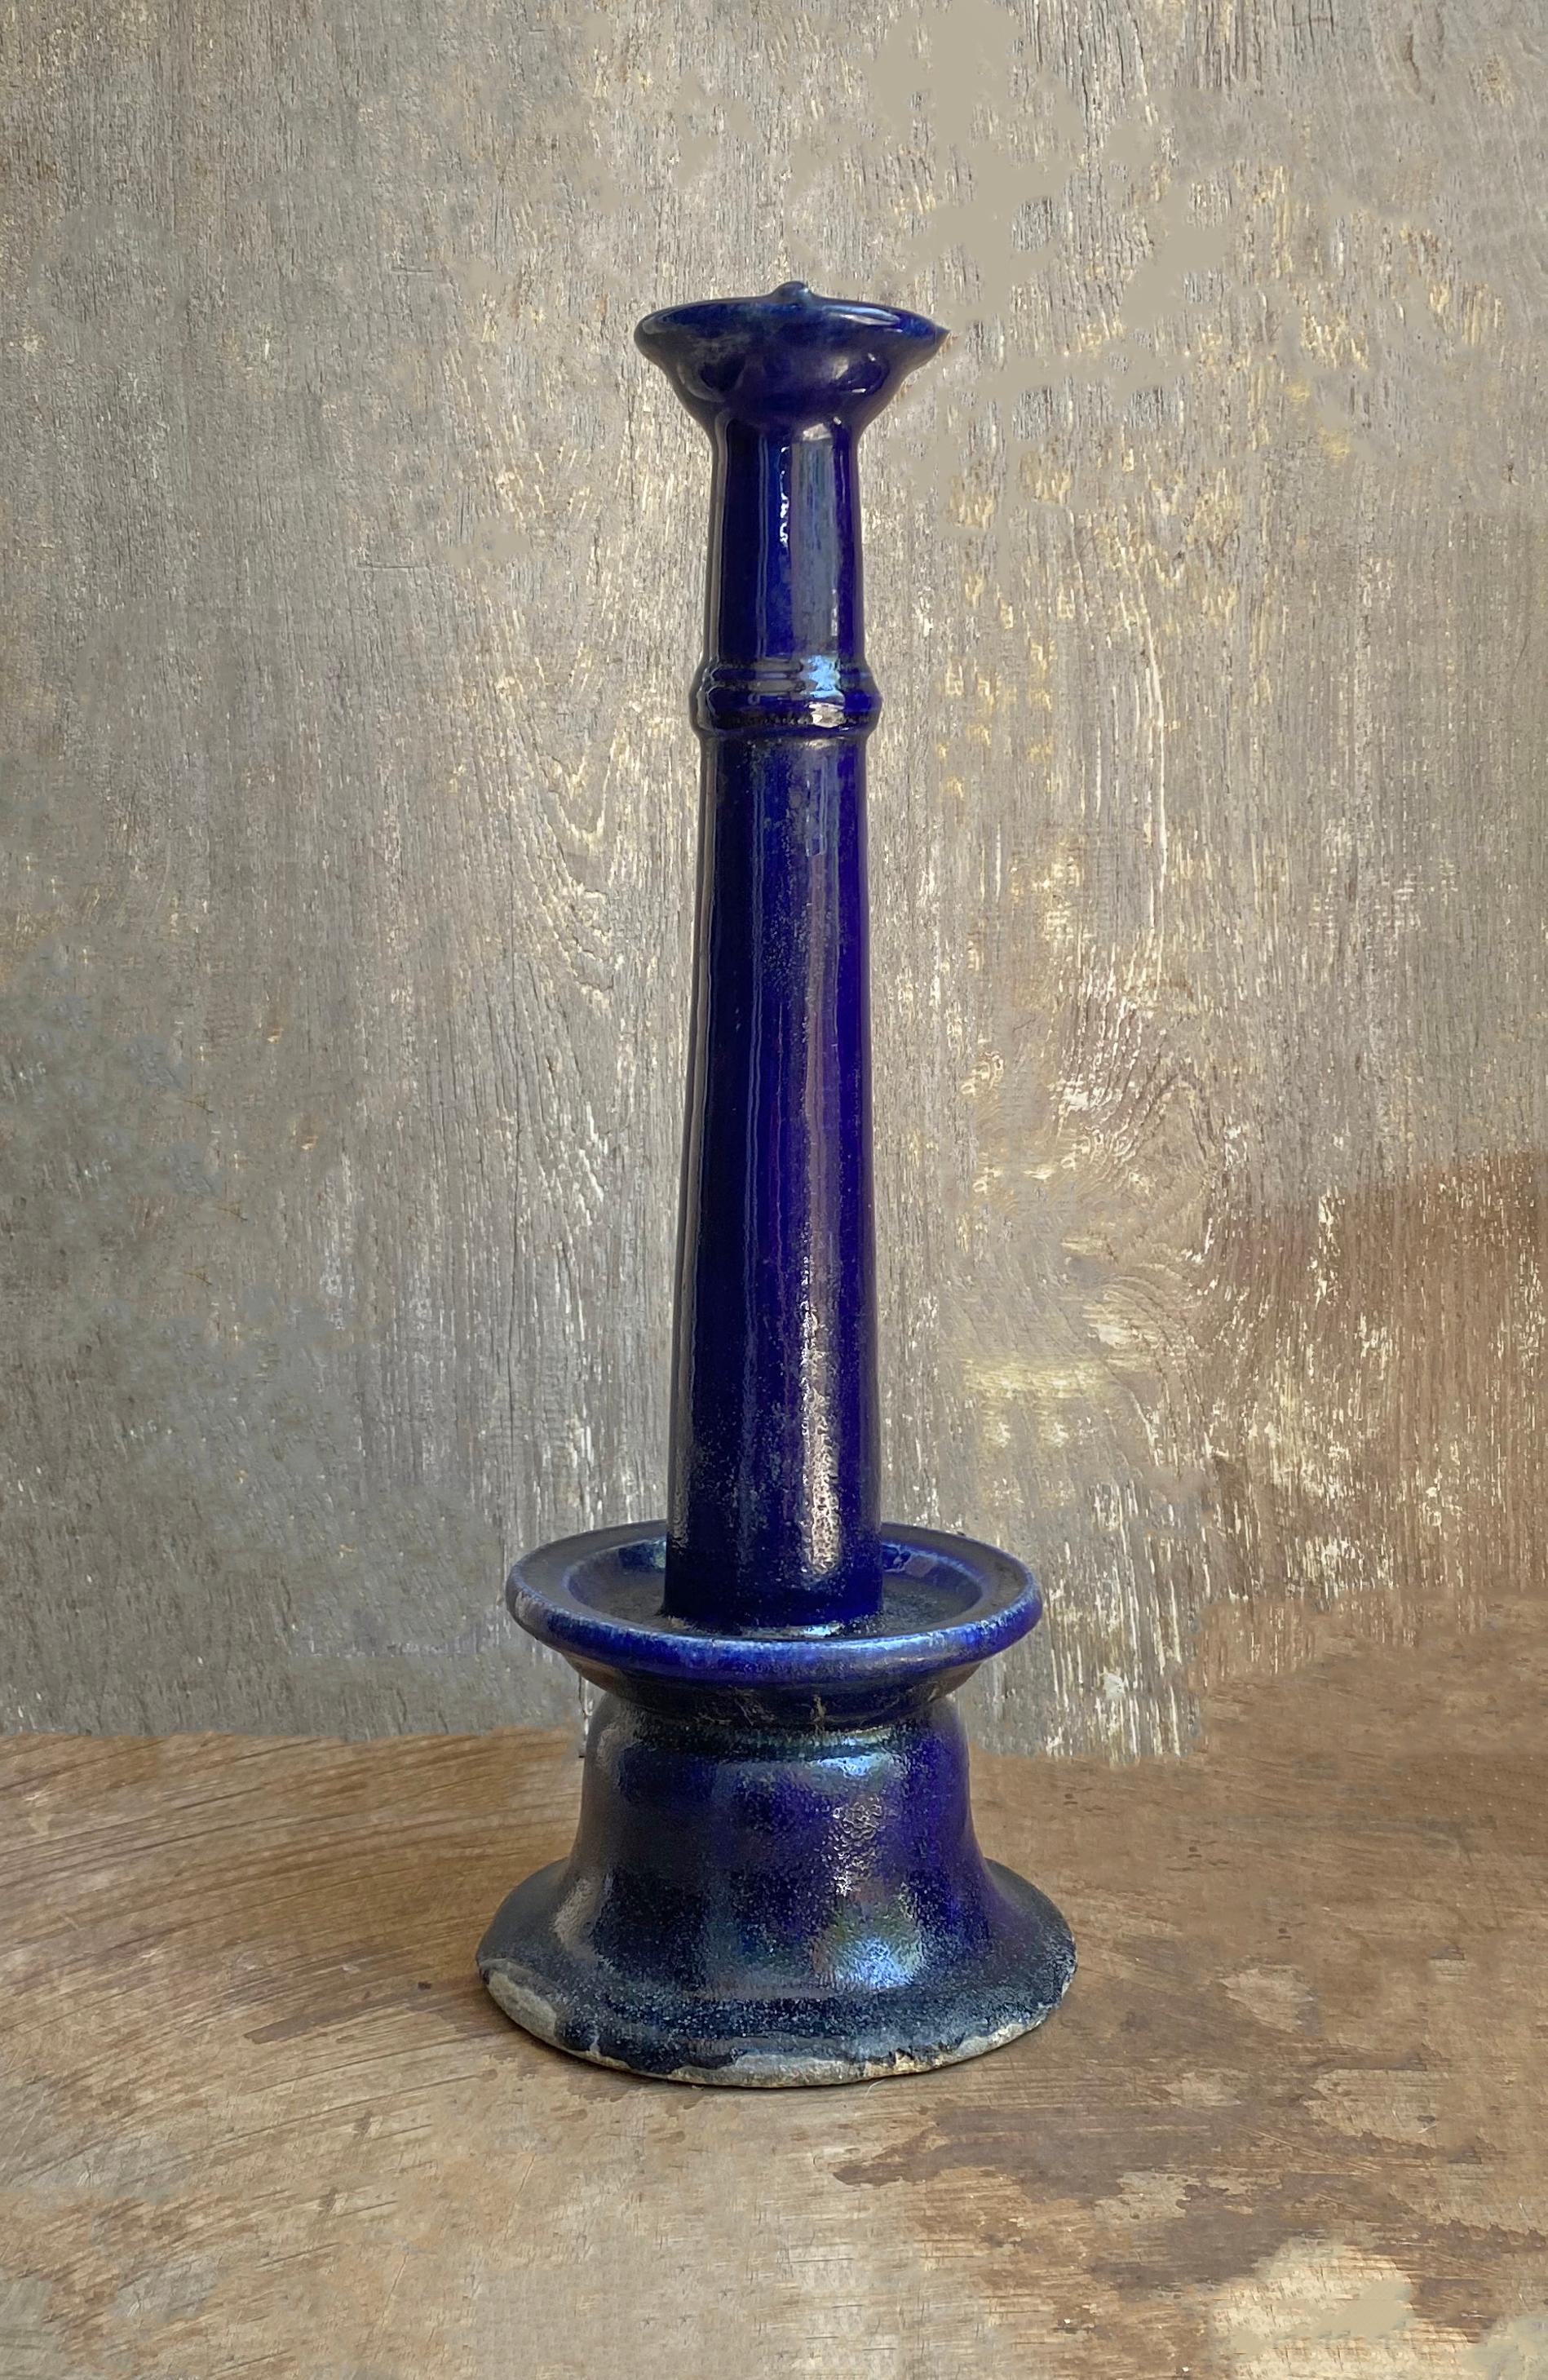 This Chinese oil lamp from the early 20th century features a dark blue glaze which is less common than the more abundant green glaze Chinese oil lamps are often adorned with. This oil lamp is not perfectly straight and bends to one side which has